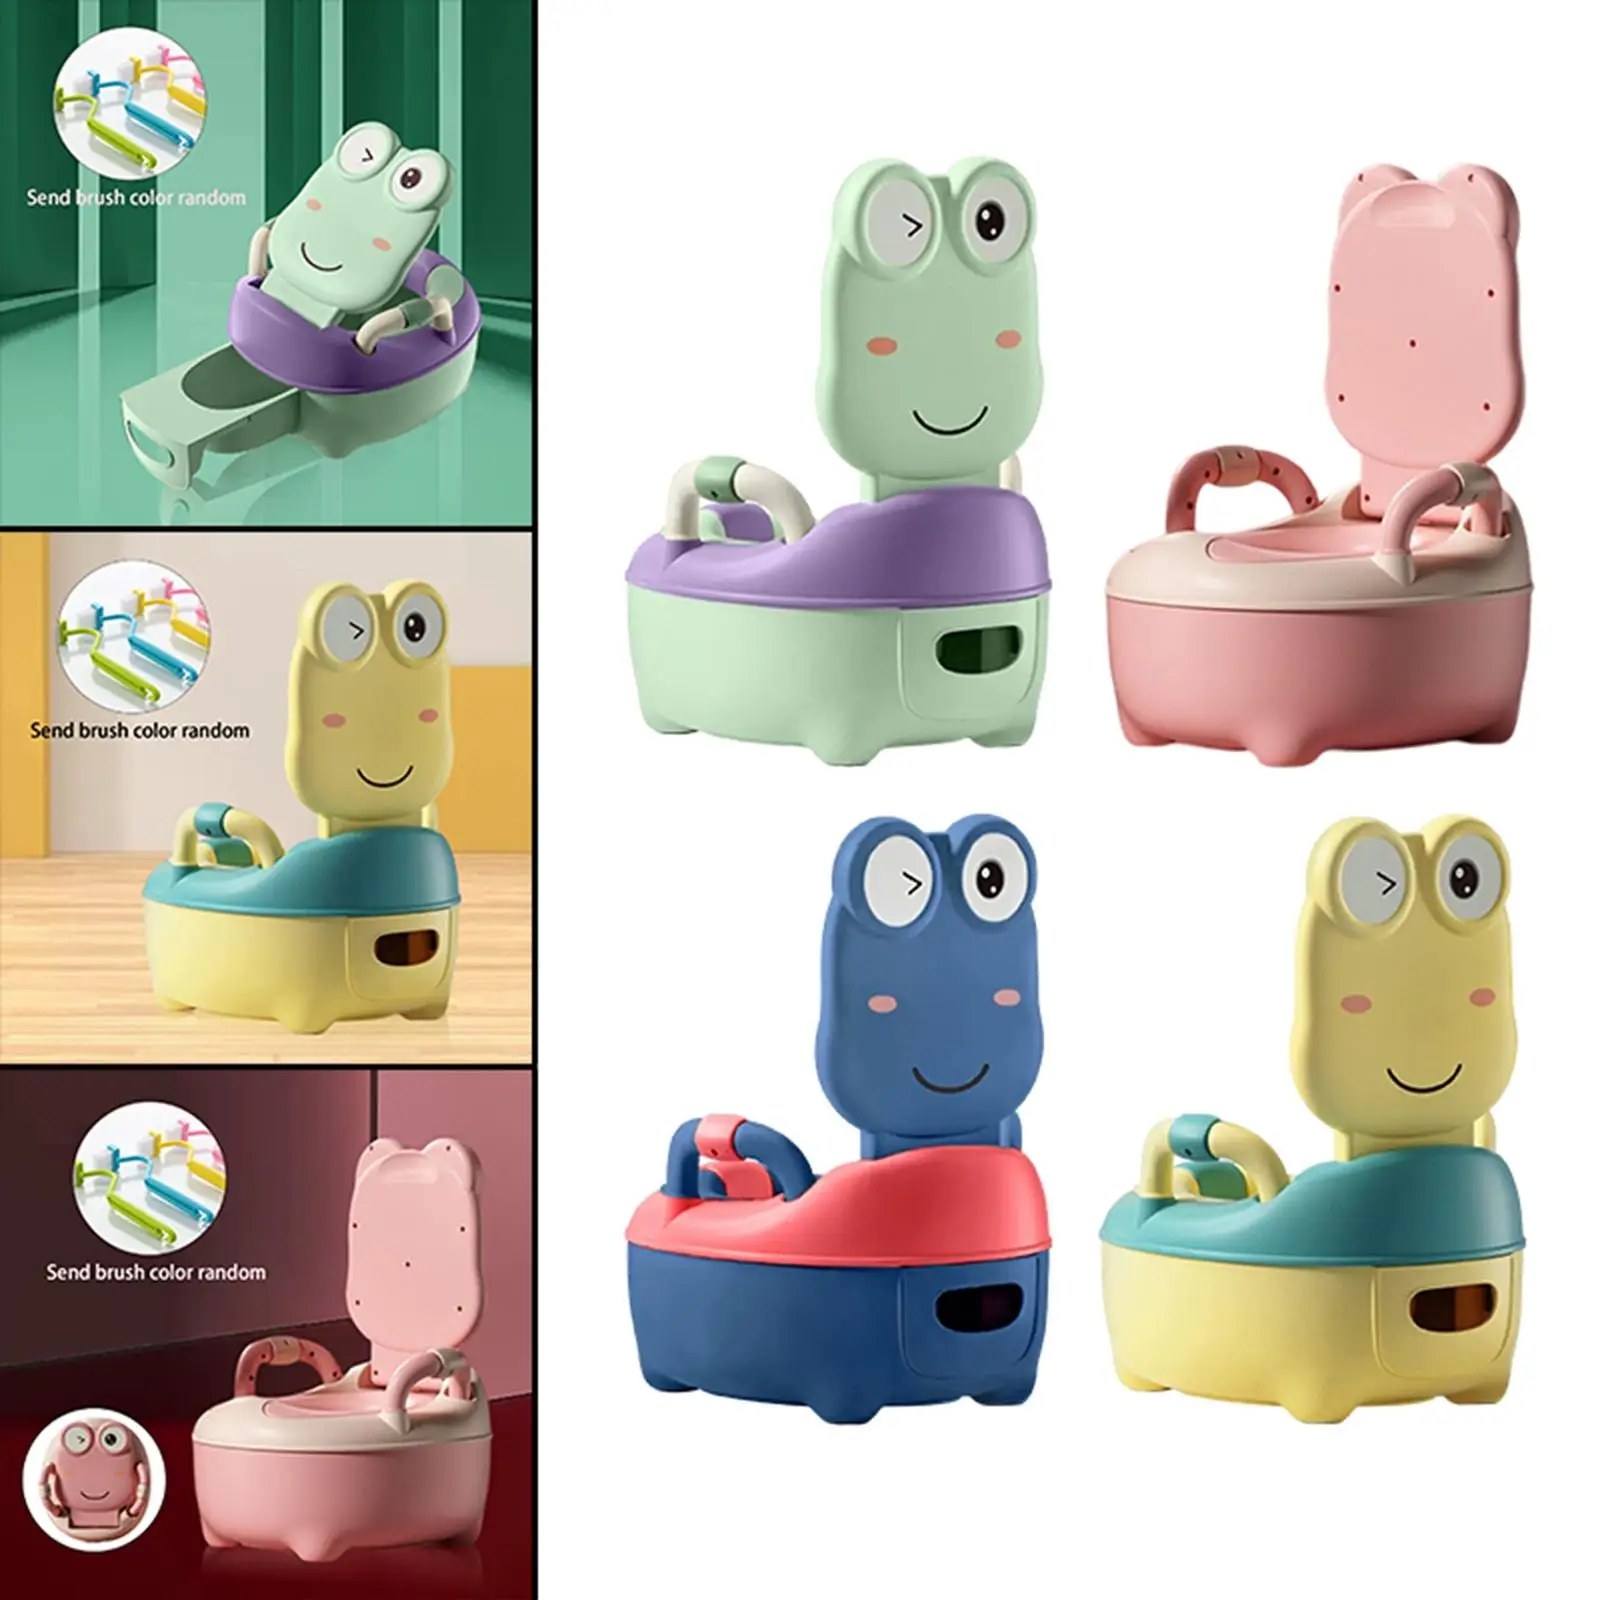 baby Toilet Seat potty Chair Toilet Training Seat Urinal Easy Cleaning for Kids Toddler Unisex Child